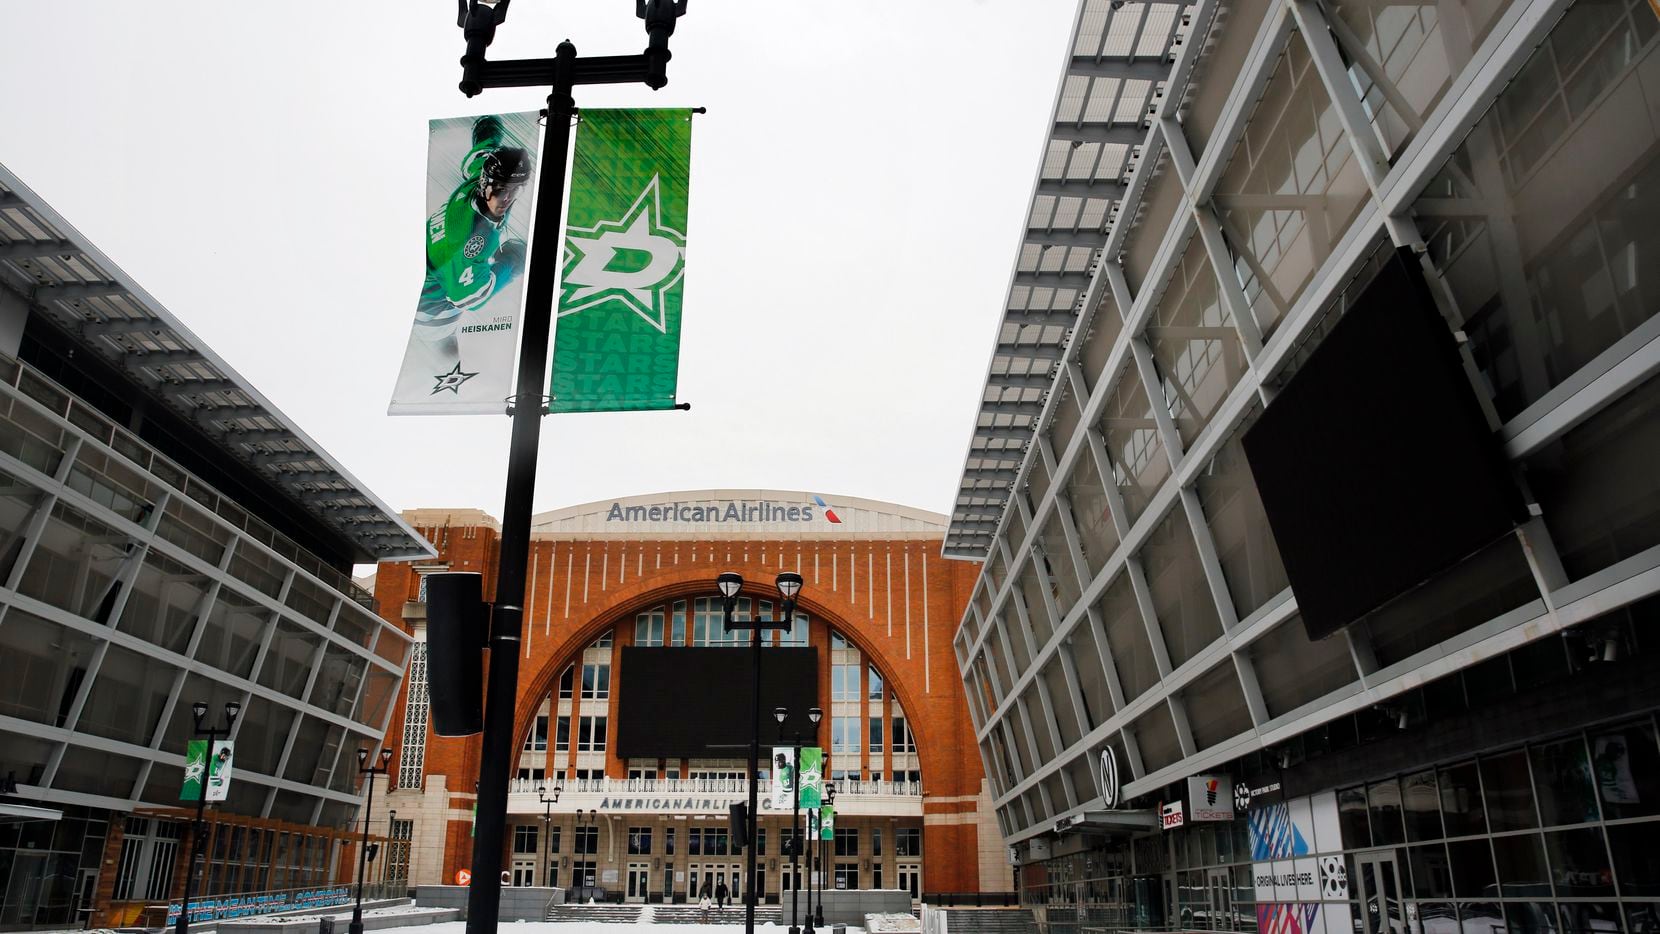 The lights and video boards in Victory Park were turned off to preserve energy in Dallas on...